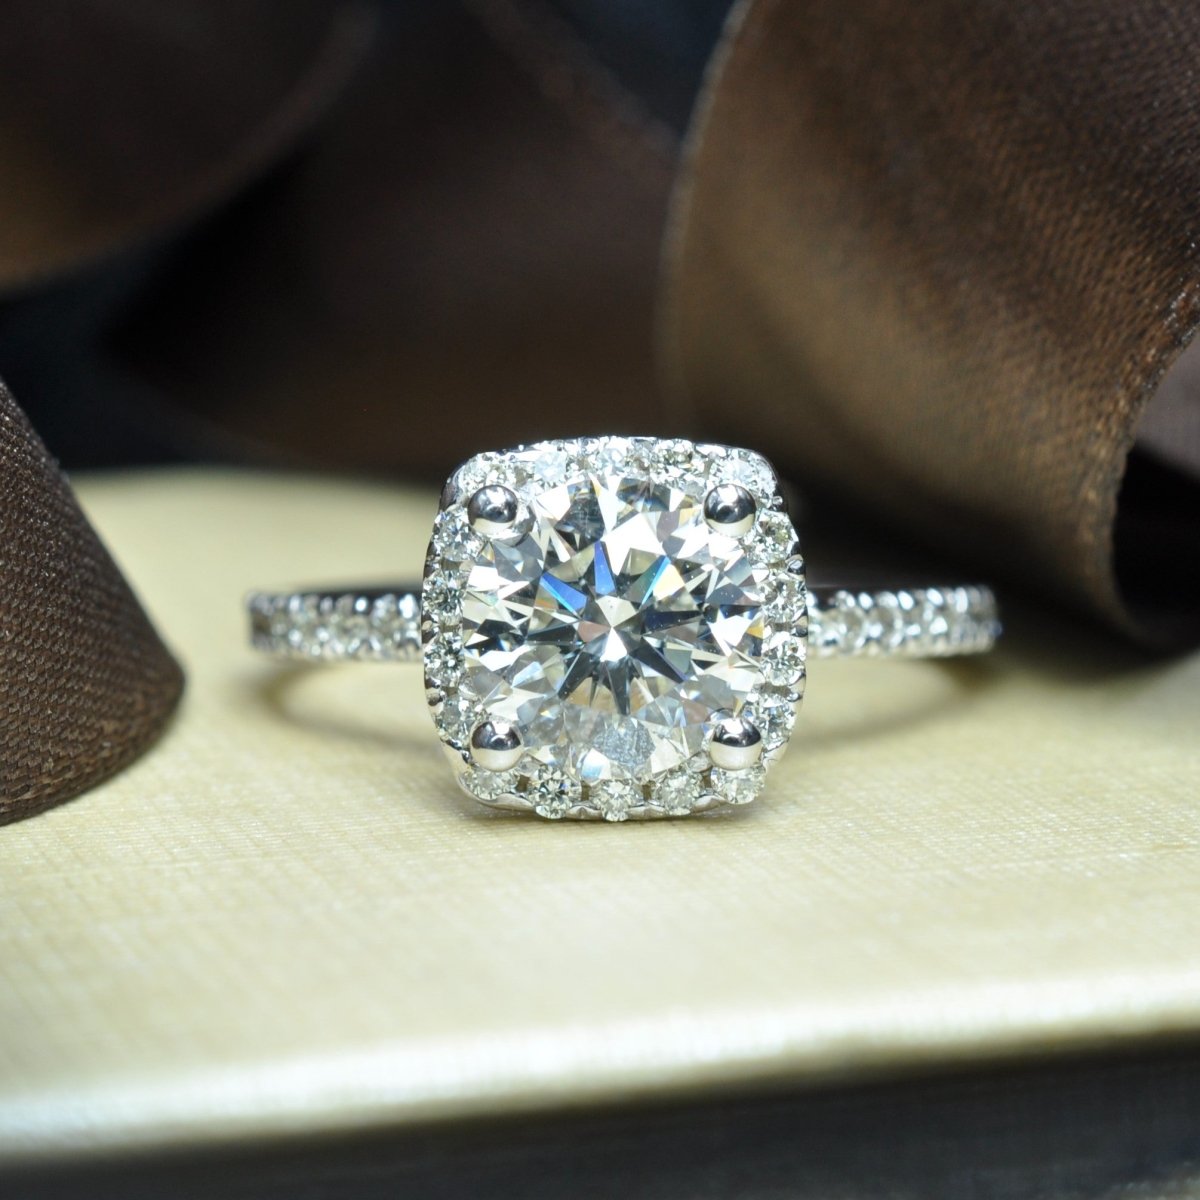 Distinctive 1.40 CT Round Cut Diamond Engagement Ring in 14 KT White Gold - Primestyle.com